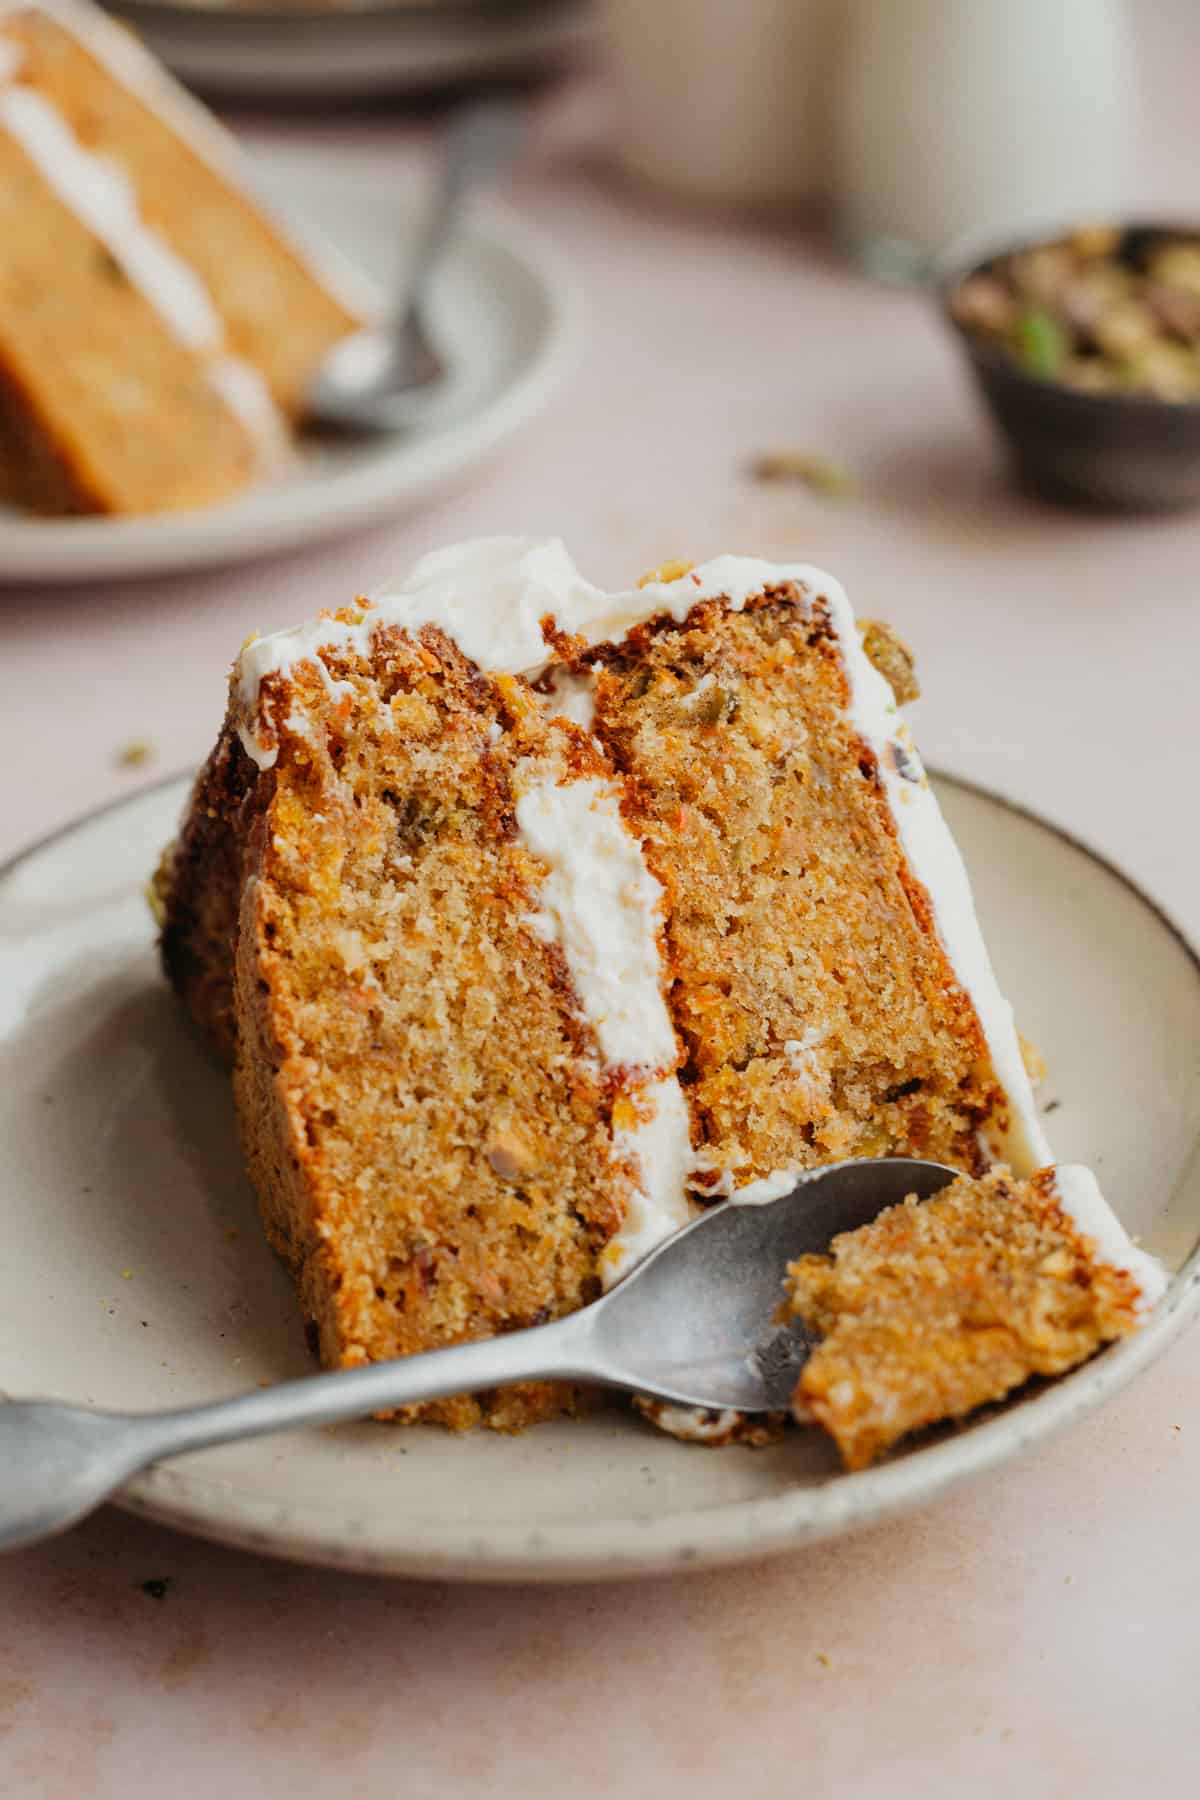 A slice of layered carrot cake with a small spoon scooping out a piece